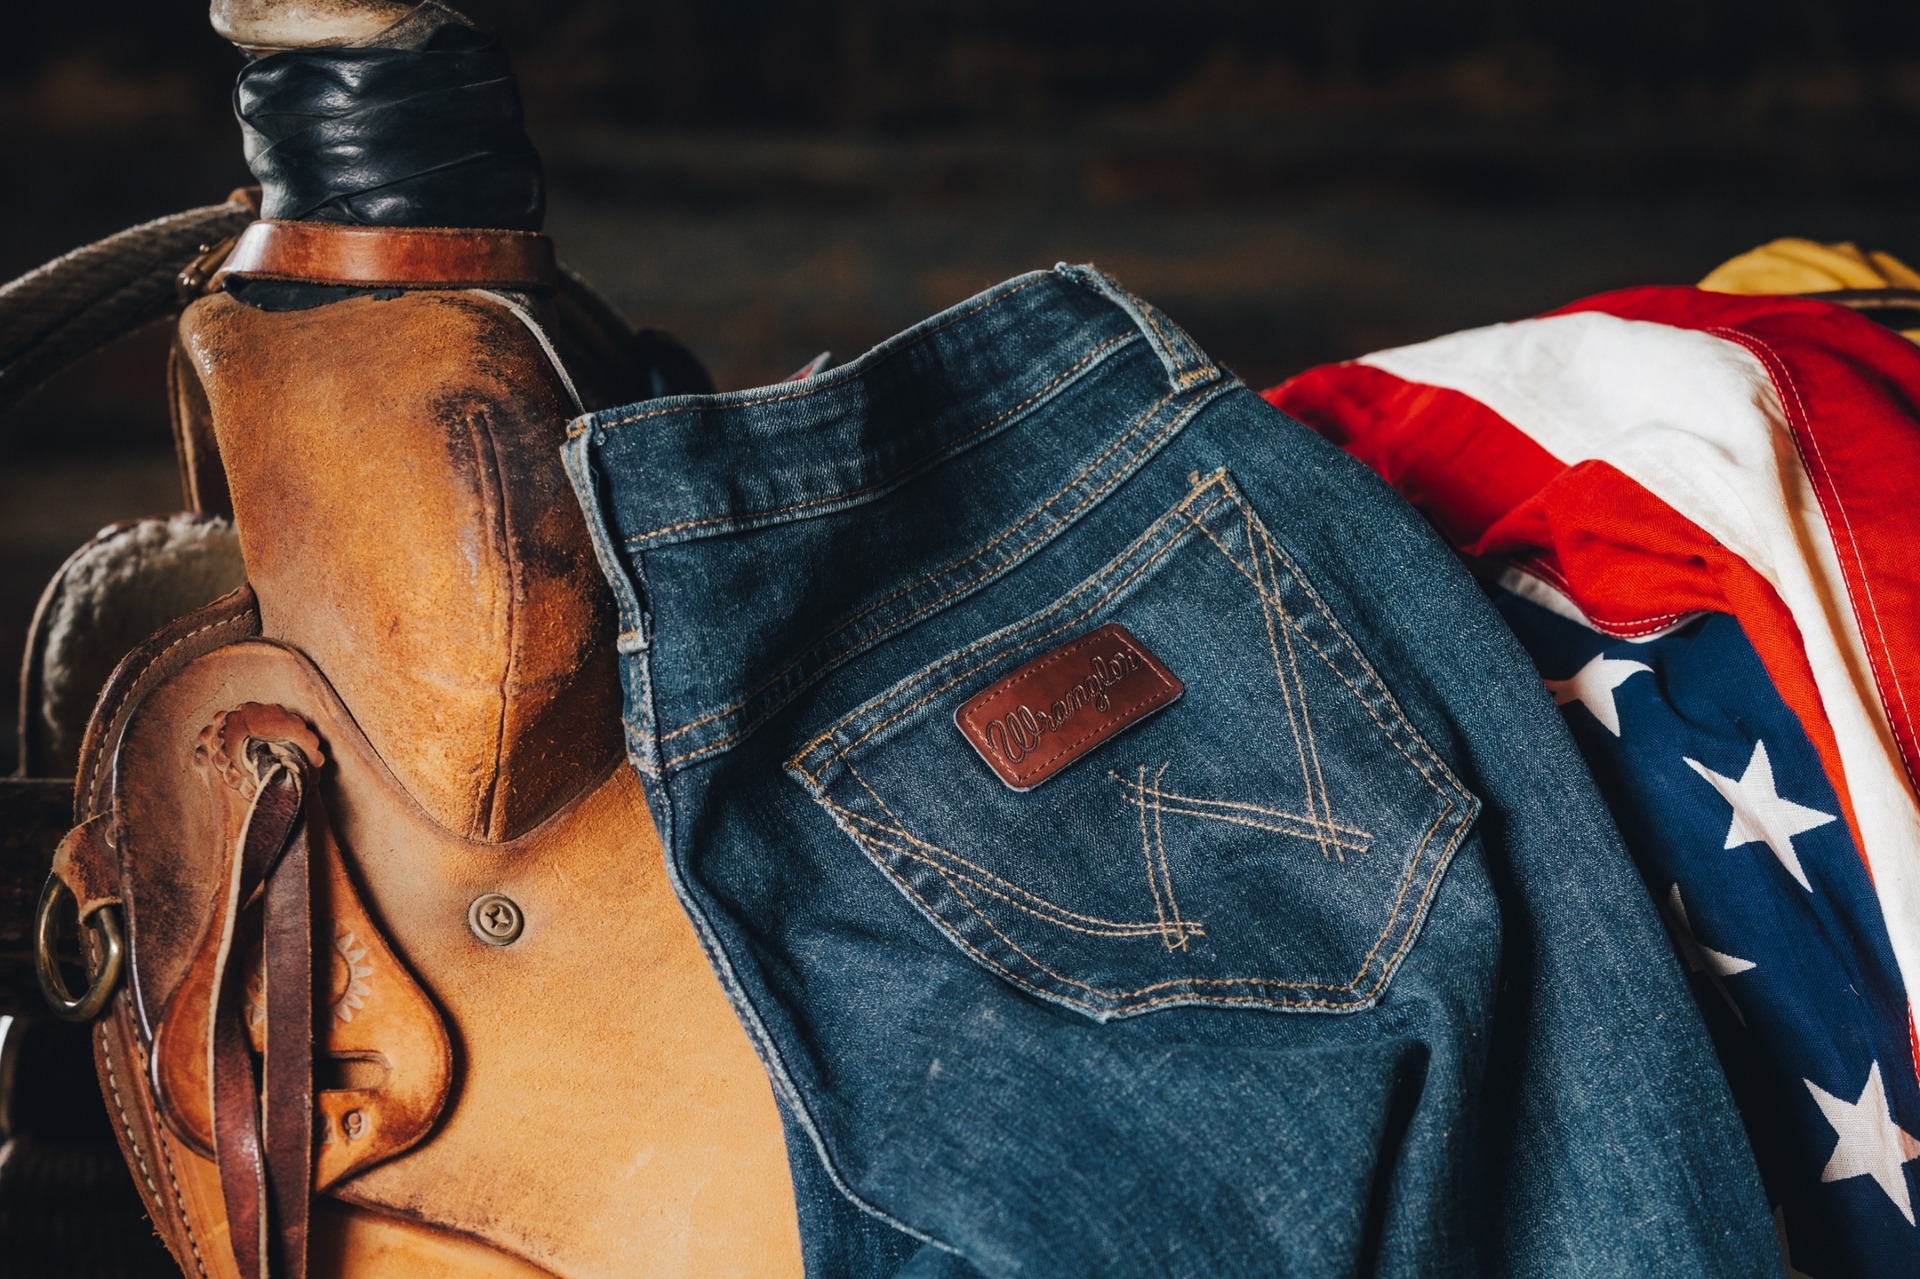 Wrangler Jeans On Saddle with American flag in backgroun